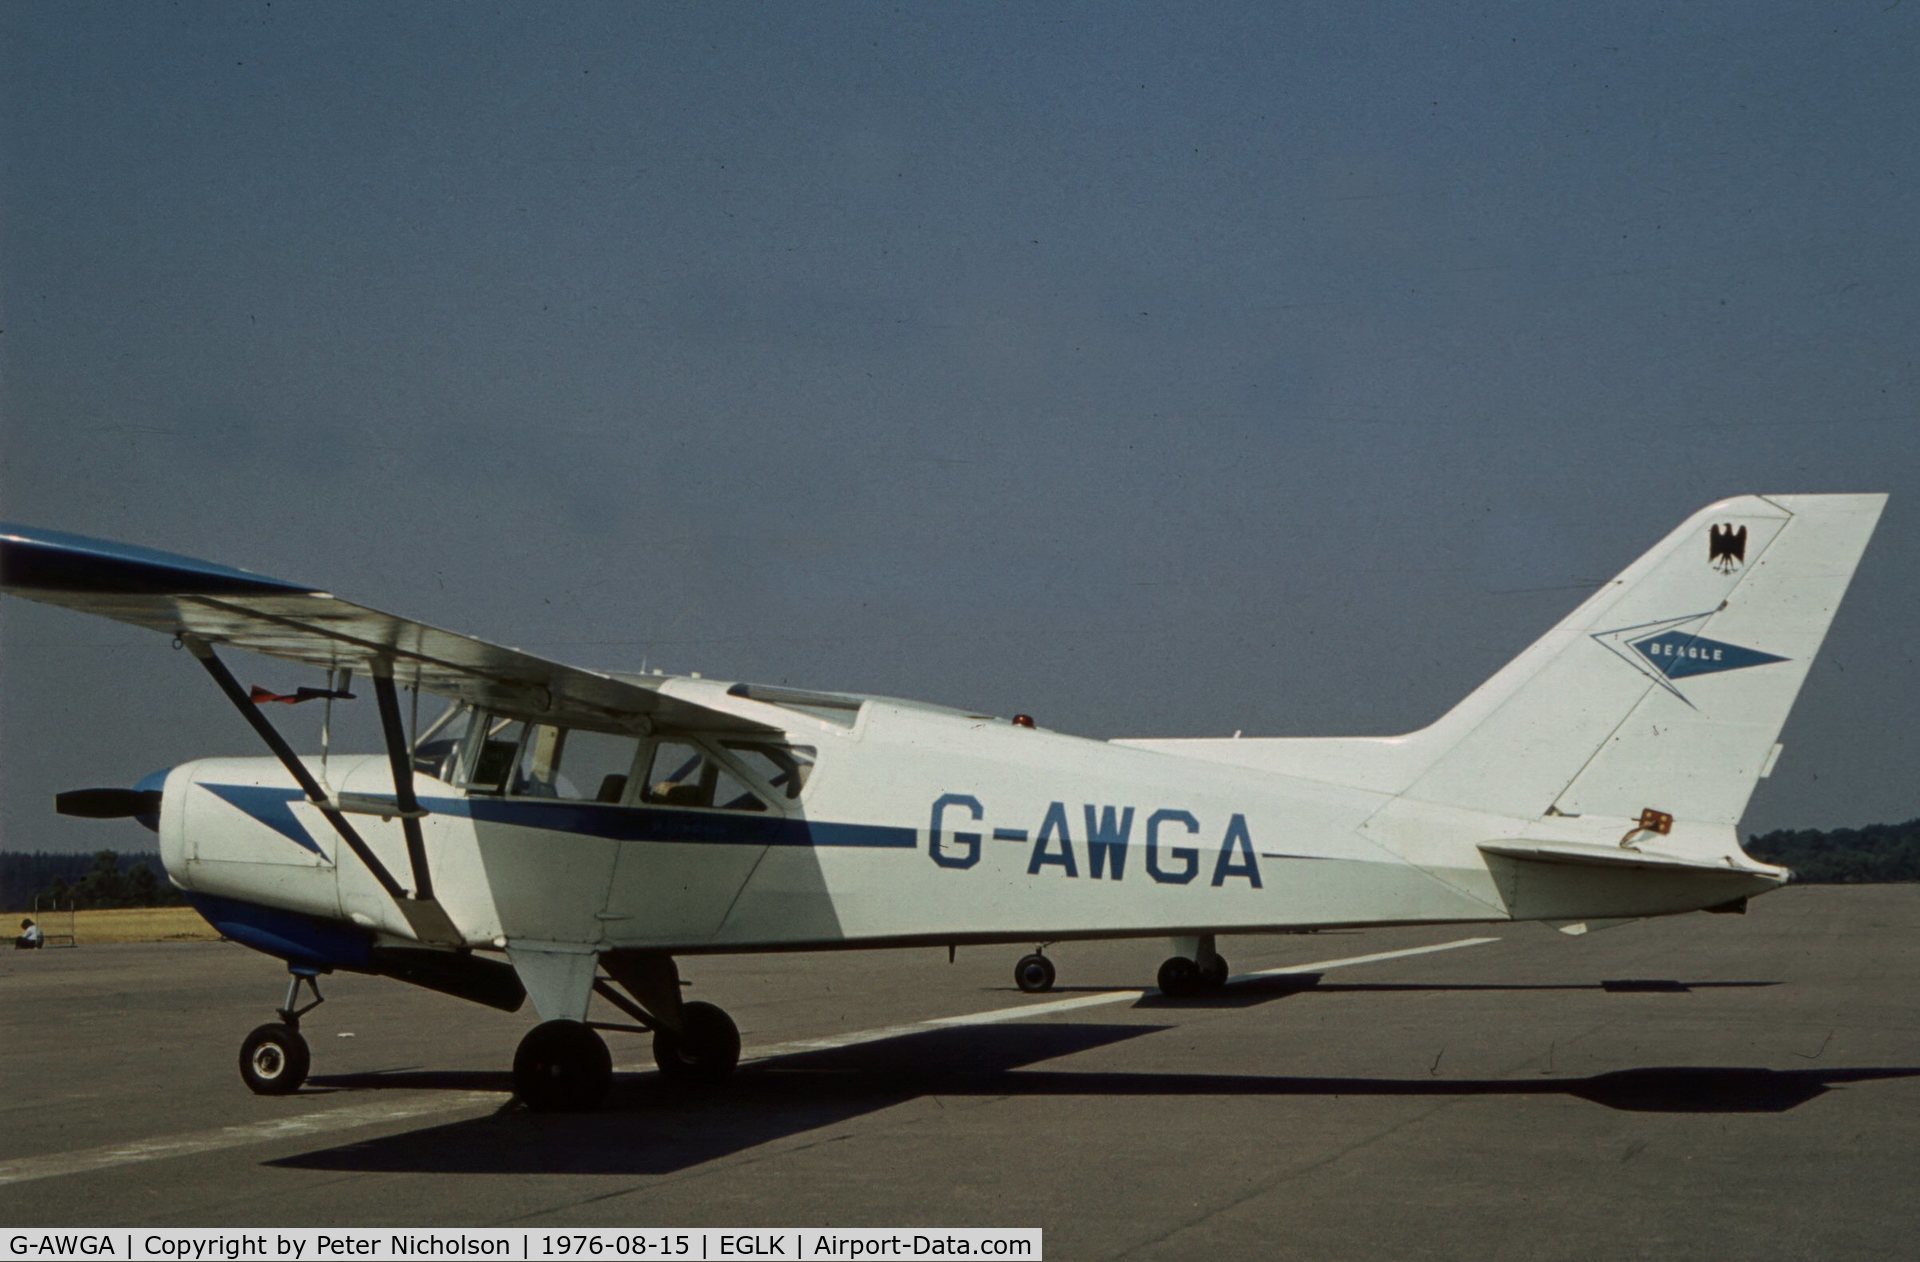 G-AWGA, 1962 Beagle A-109 Airdale C/N B.535, This Airedale attended the 1976 Blackbushe Fly-in.